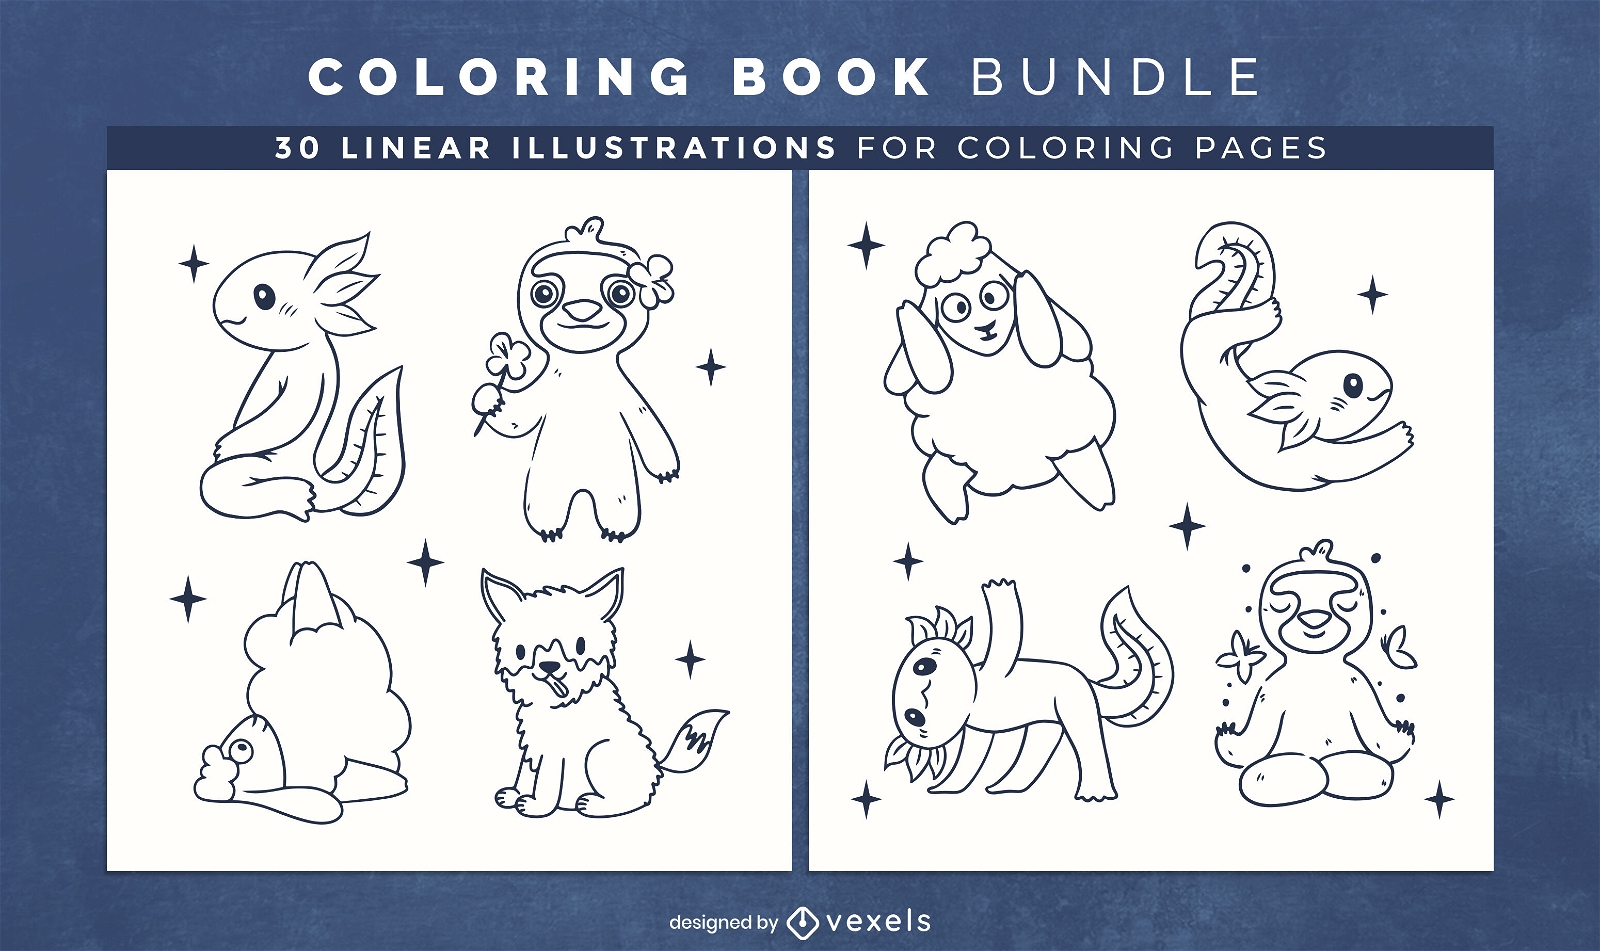 Animal Coloring Book for Adults: coloring pages with funny images